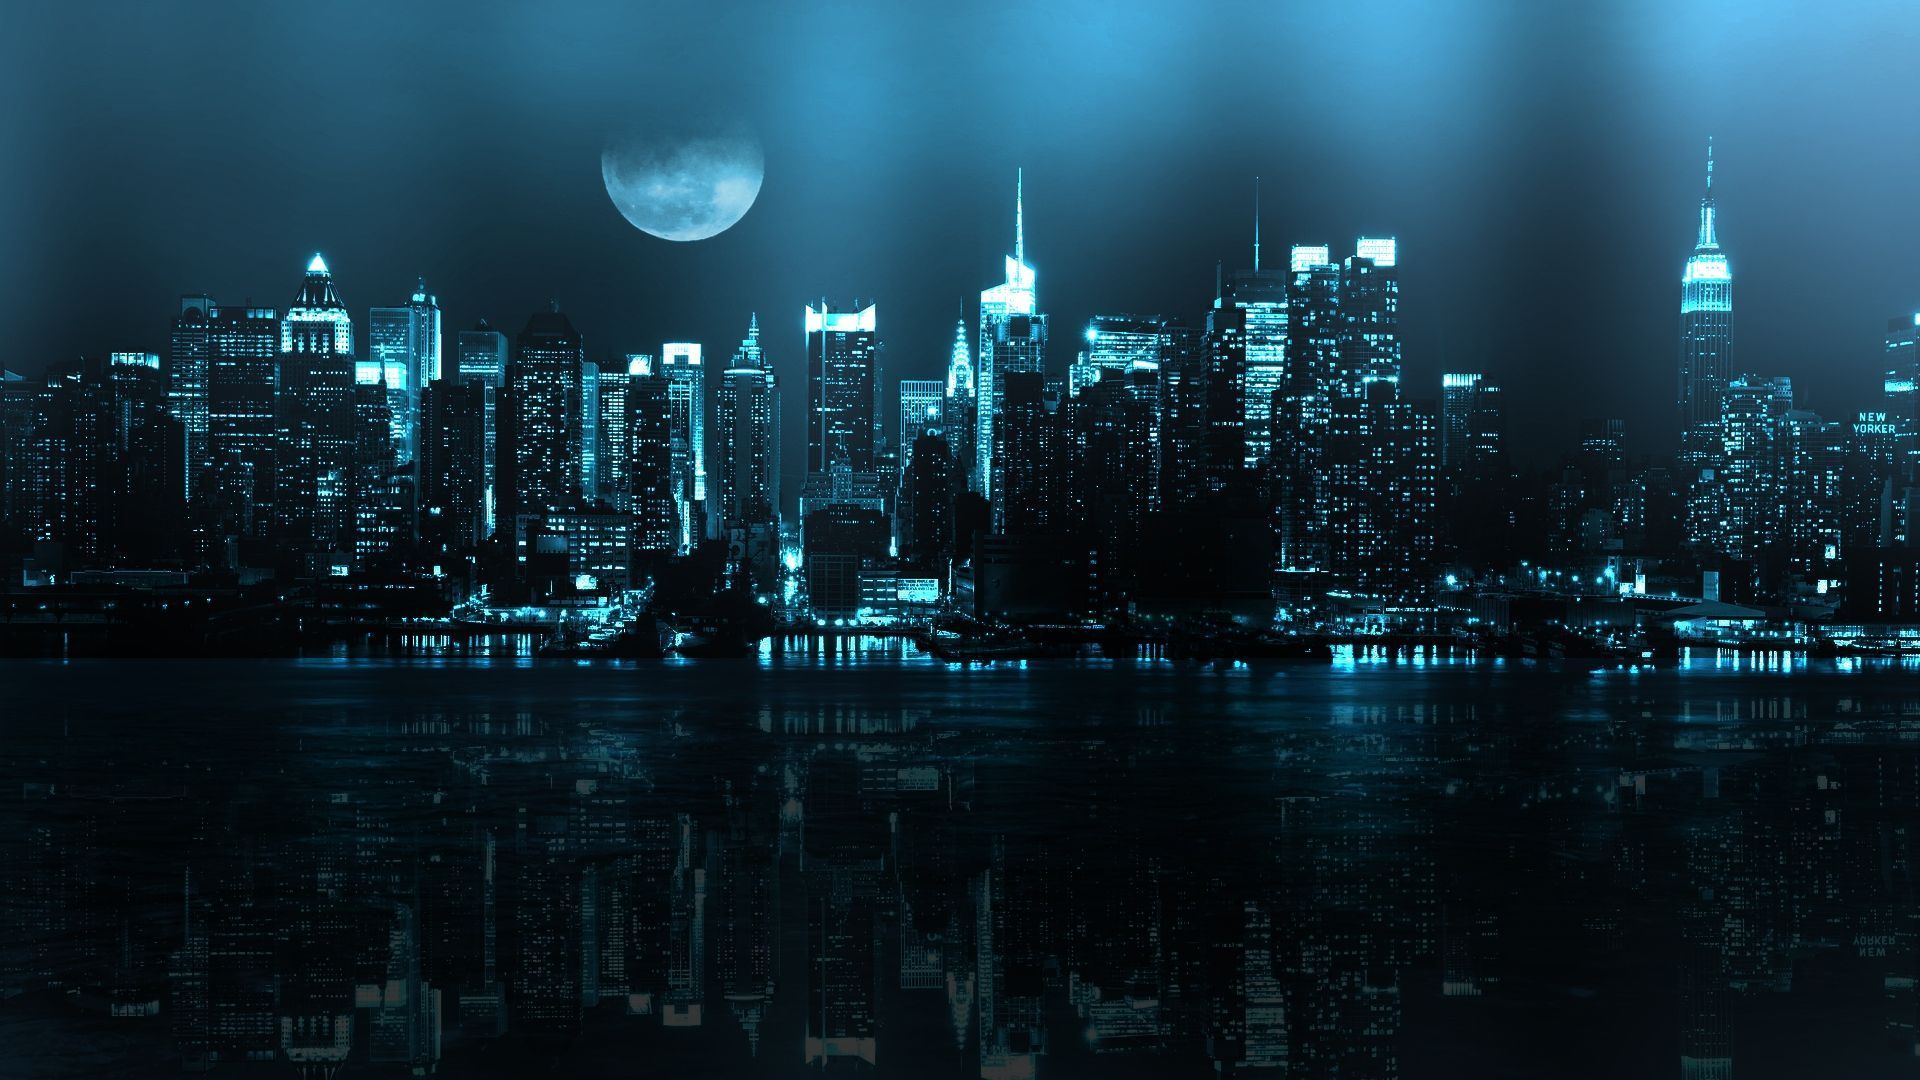 Cool Wallpapers 1920x1080 with City Light at Night | HD Wallpapers ...